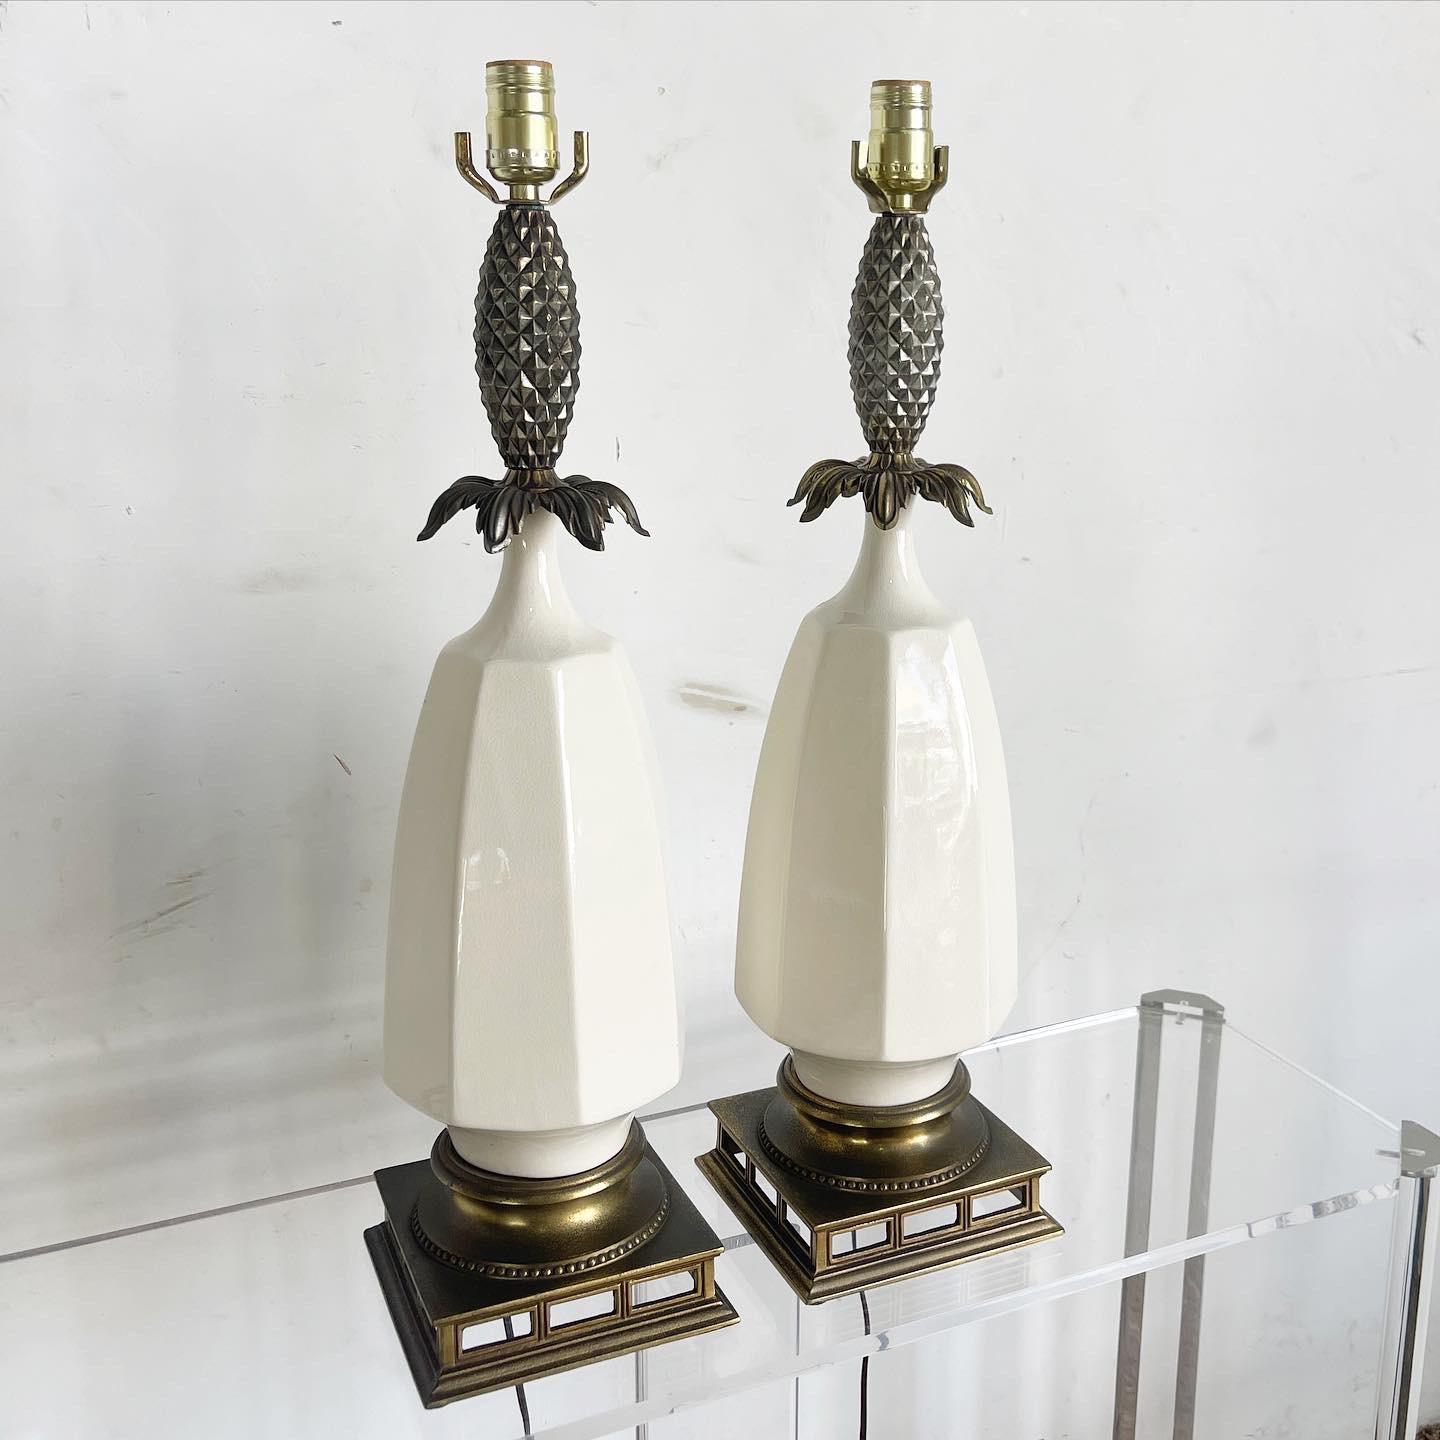 Elevate your home with the Cream Ceramic Brass Pineapple Table Lamps, a glamorous pair that captures the elegance of Hollywood Regency. Featuring a luscious pineapple shape with a delicate cream ceramic body and shiny brass accents, these lamps